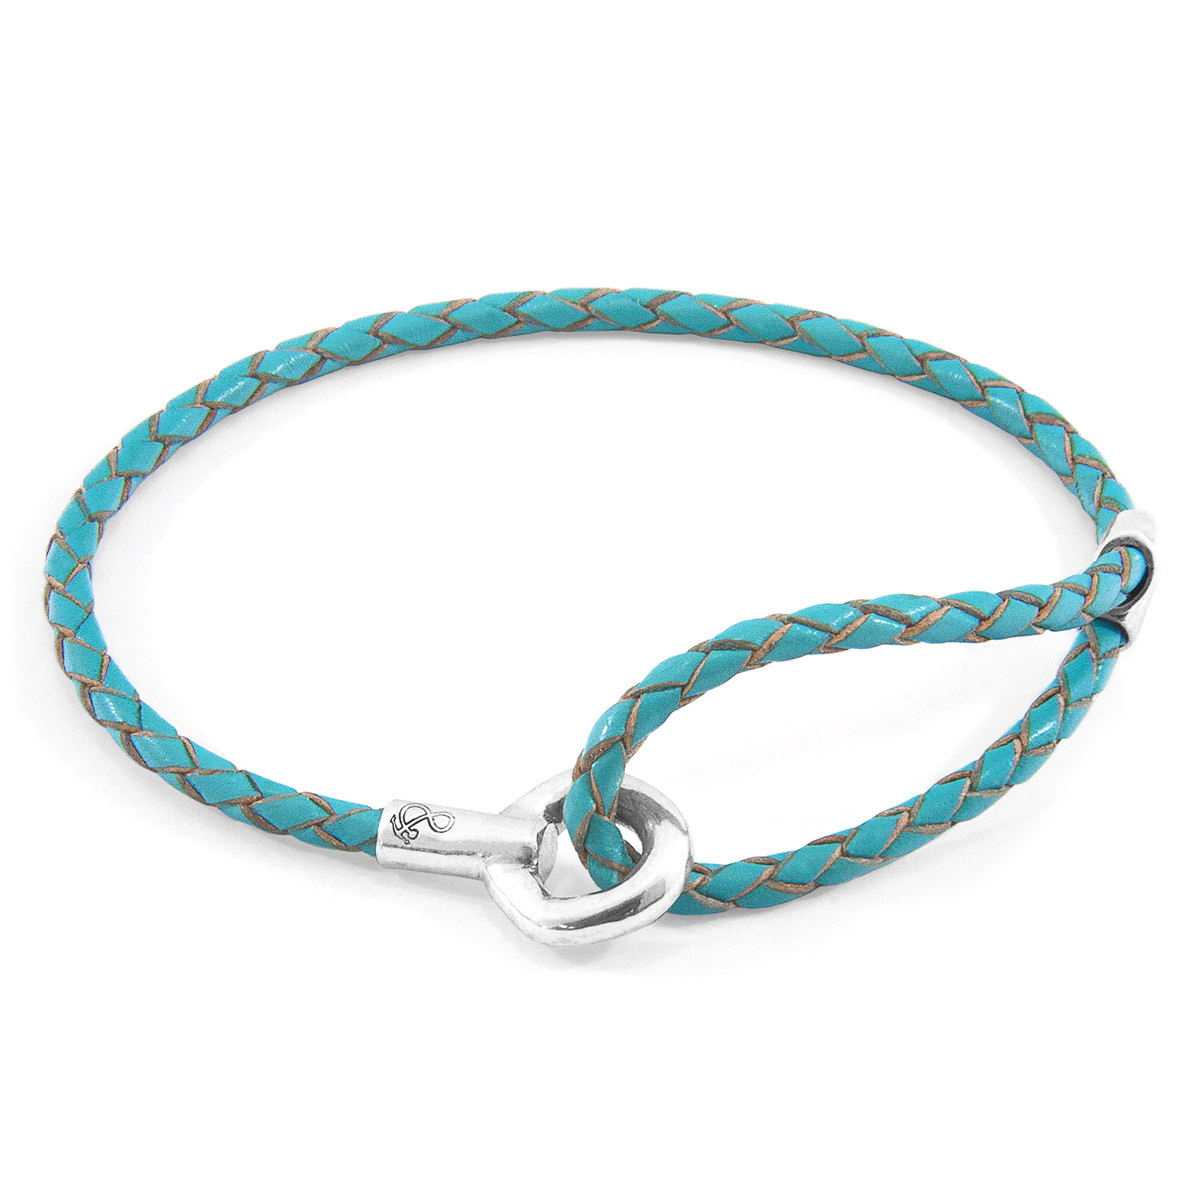 Turquoise Blue Blake Silver and Braided Leather Bracelet